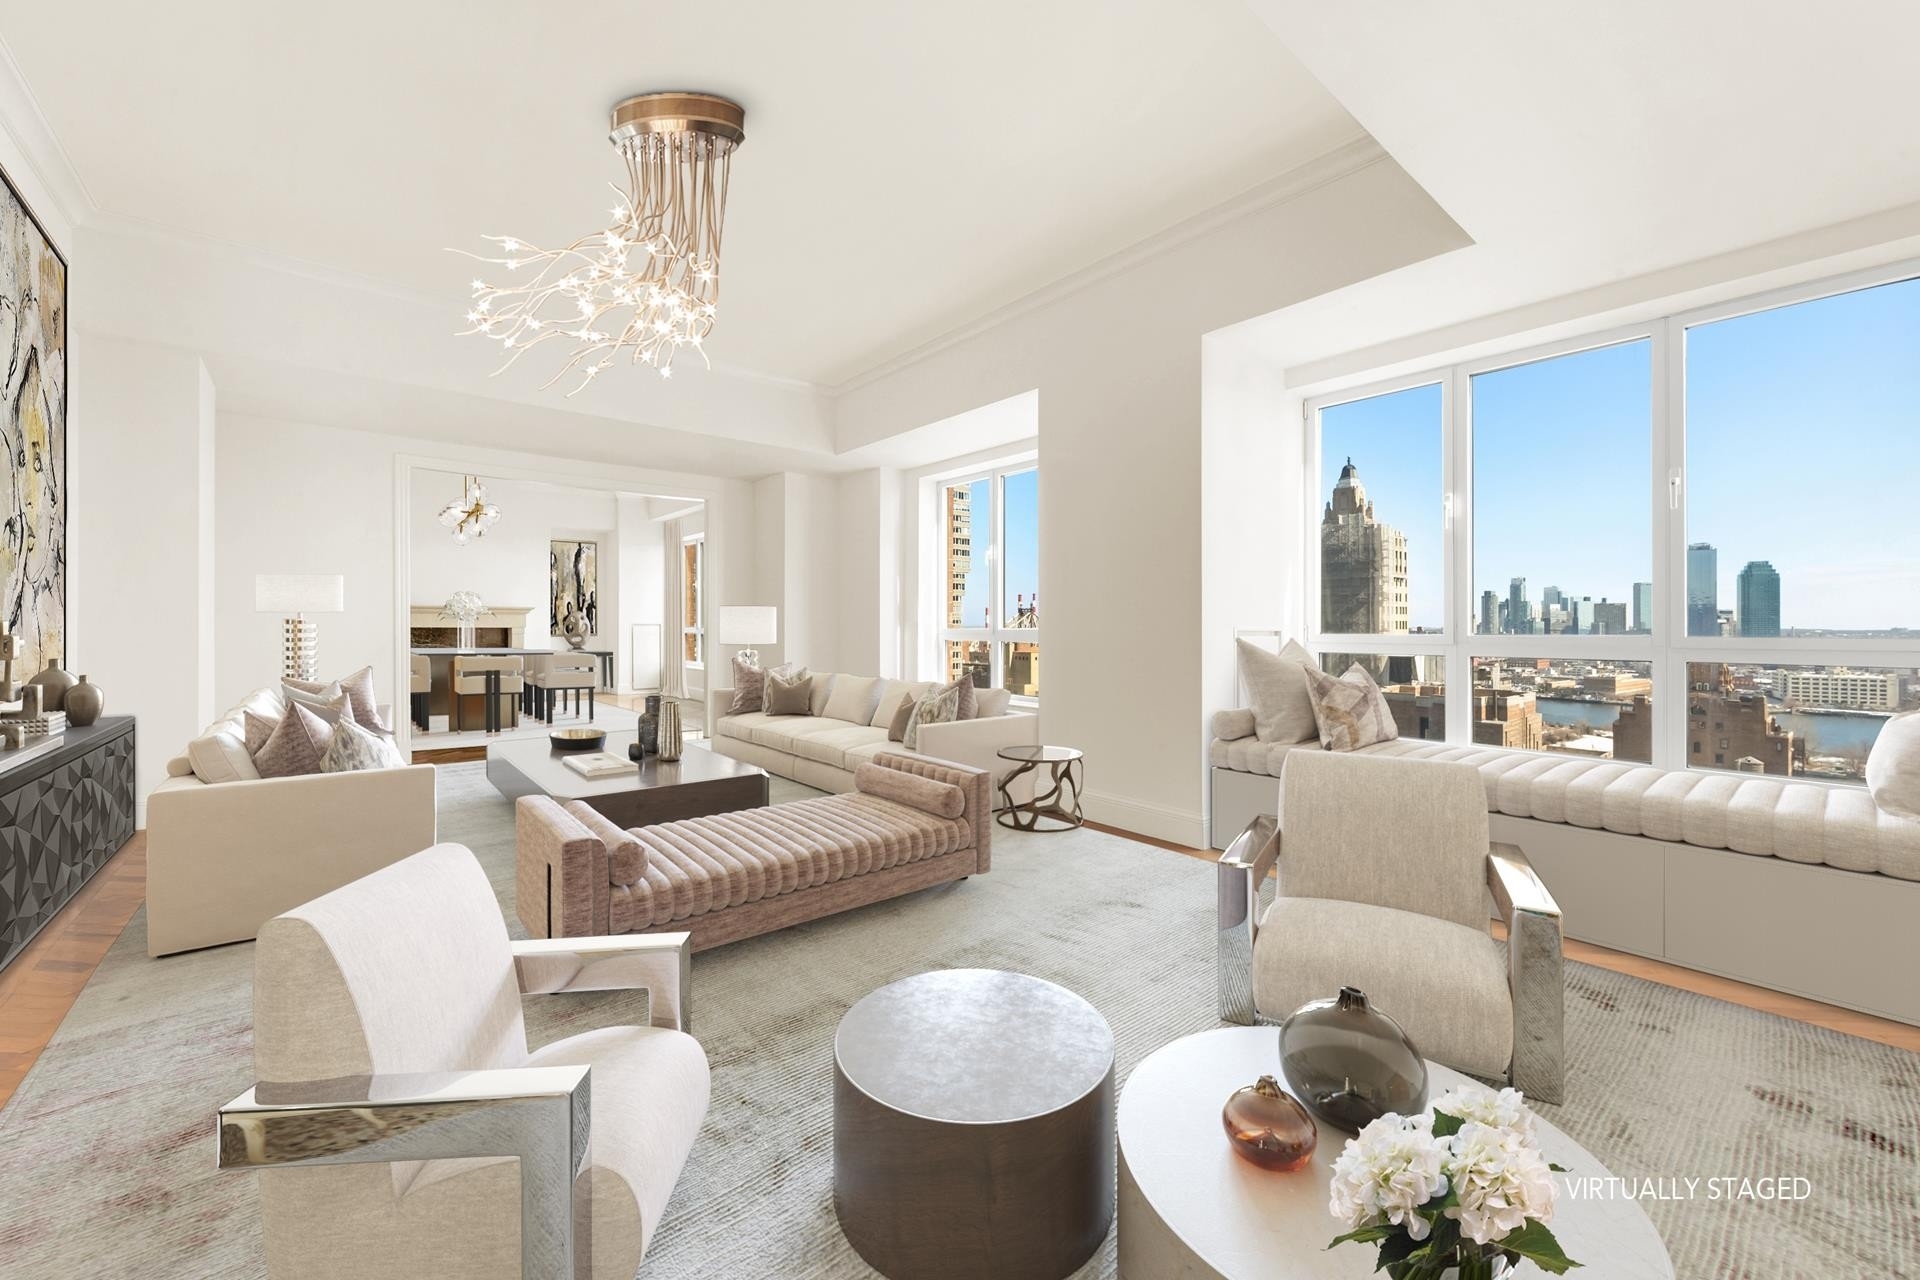 Condominium for Sale at The Beekman Regent, 351 E 51ST ST, PH8 Turtle Bay, New York, NY 10022